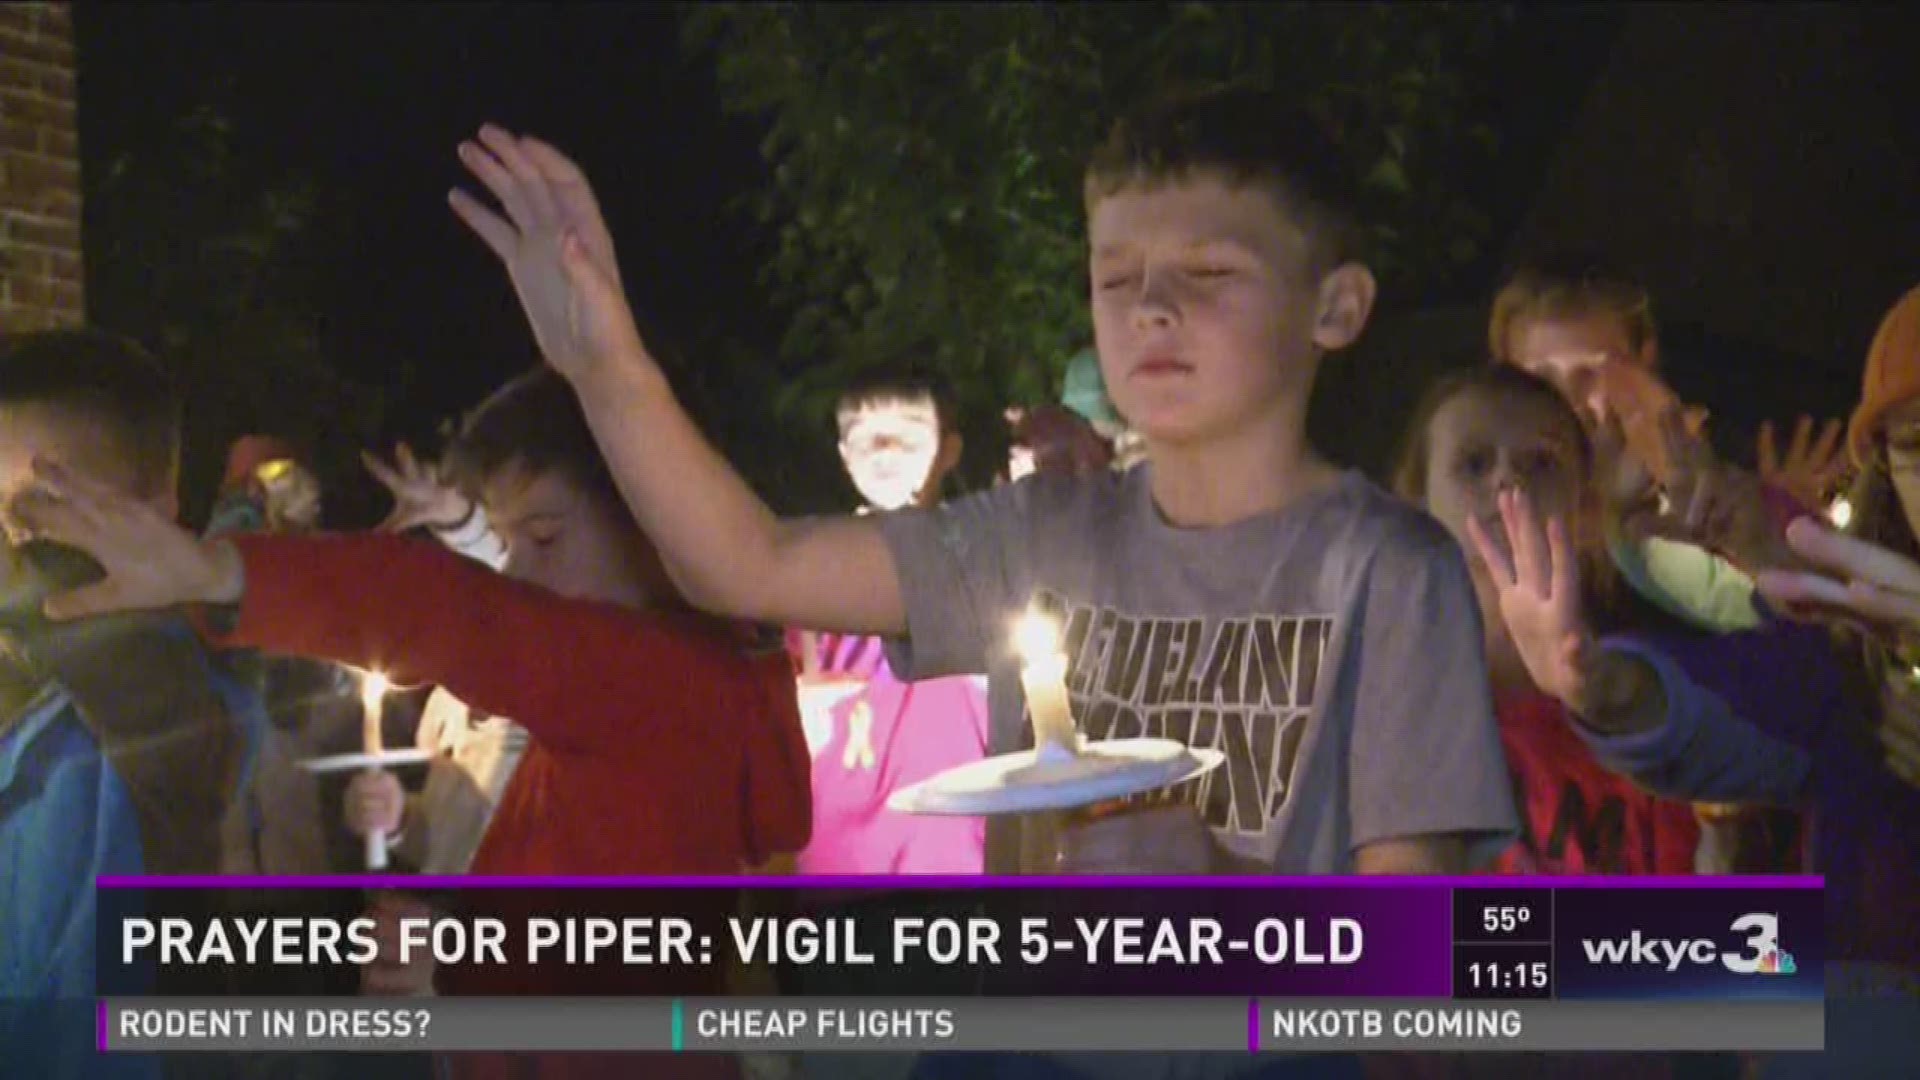 Prayers for Piper: Vigil for 5 year old